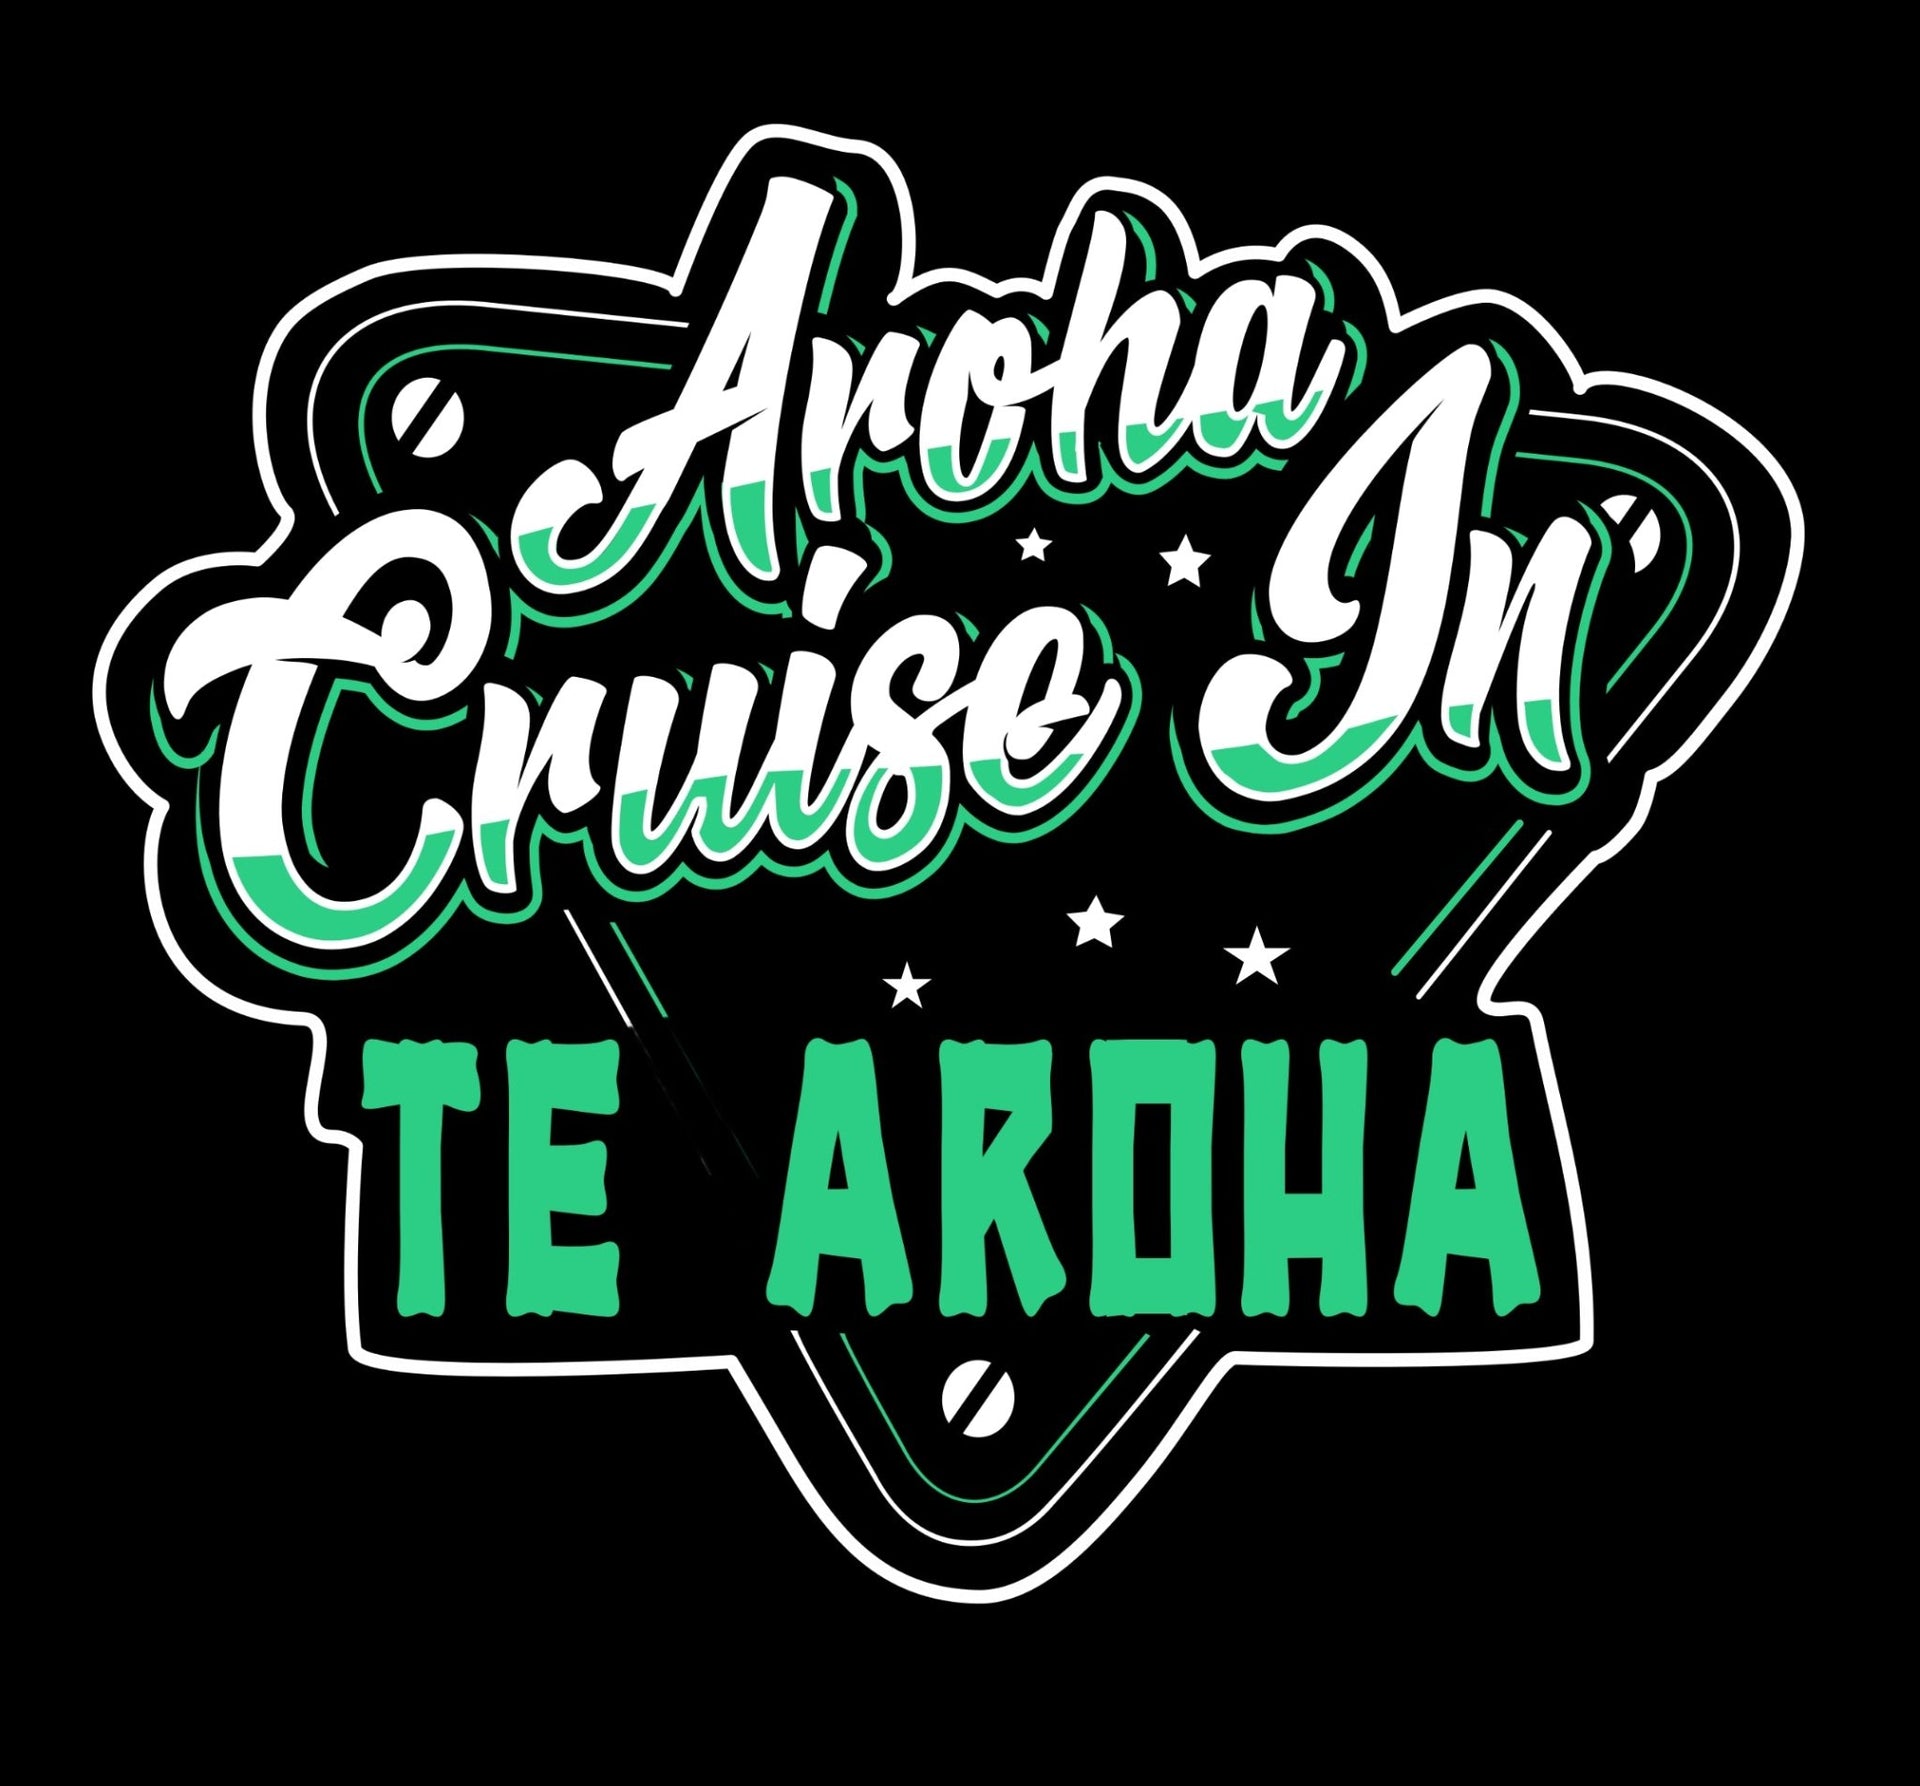 Load video: Aroha Cruise In - A community event we organise